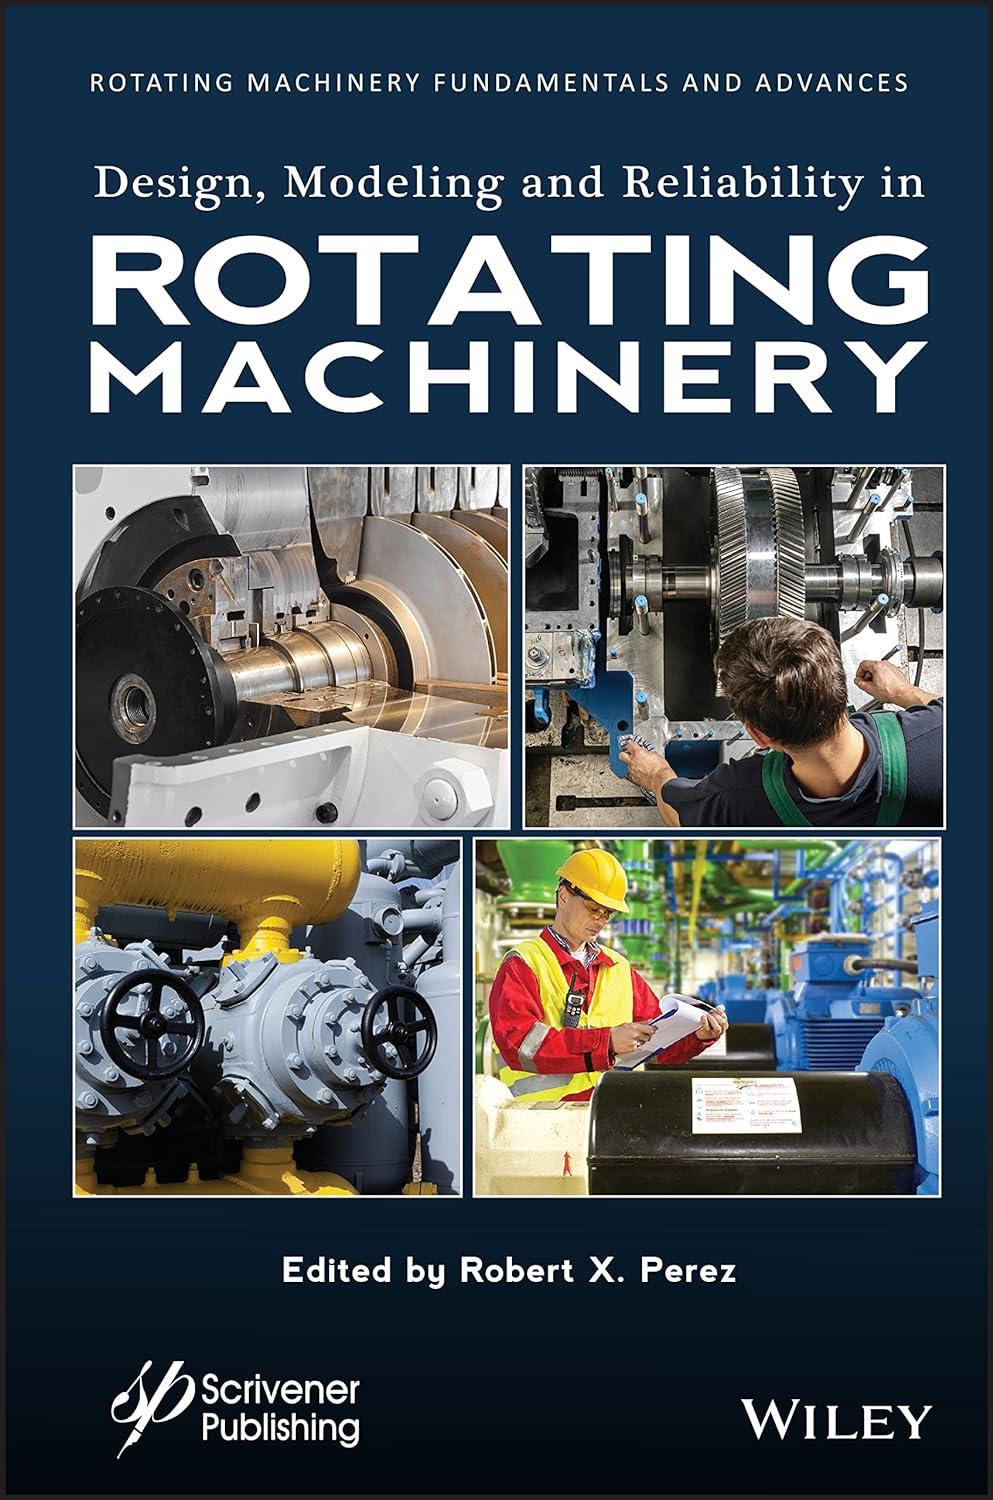 design modeling and reliability in rotating machinery rotating machinery fundamentals and advances 1st